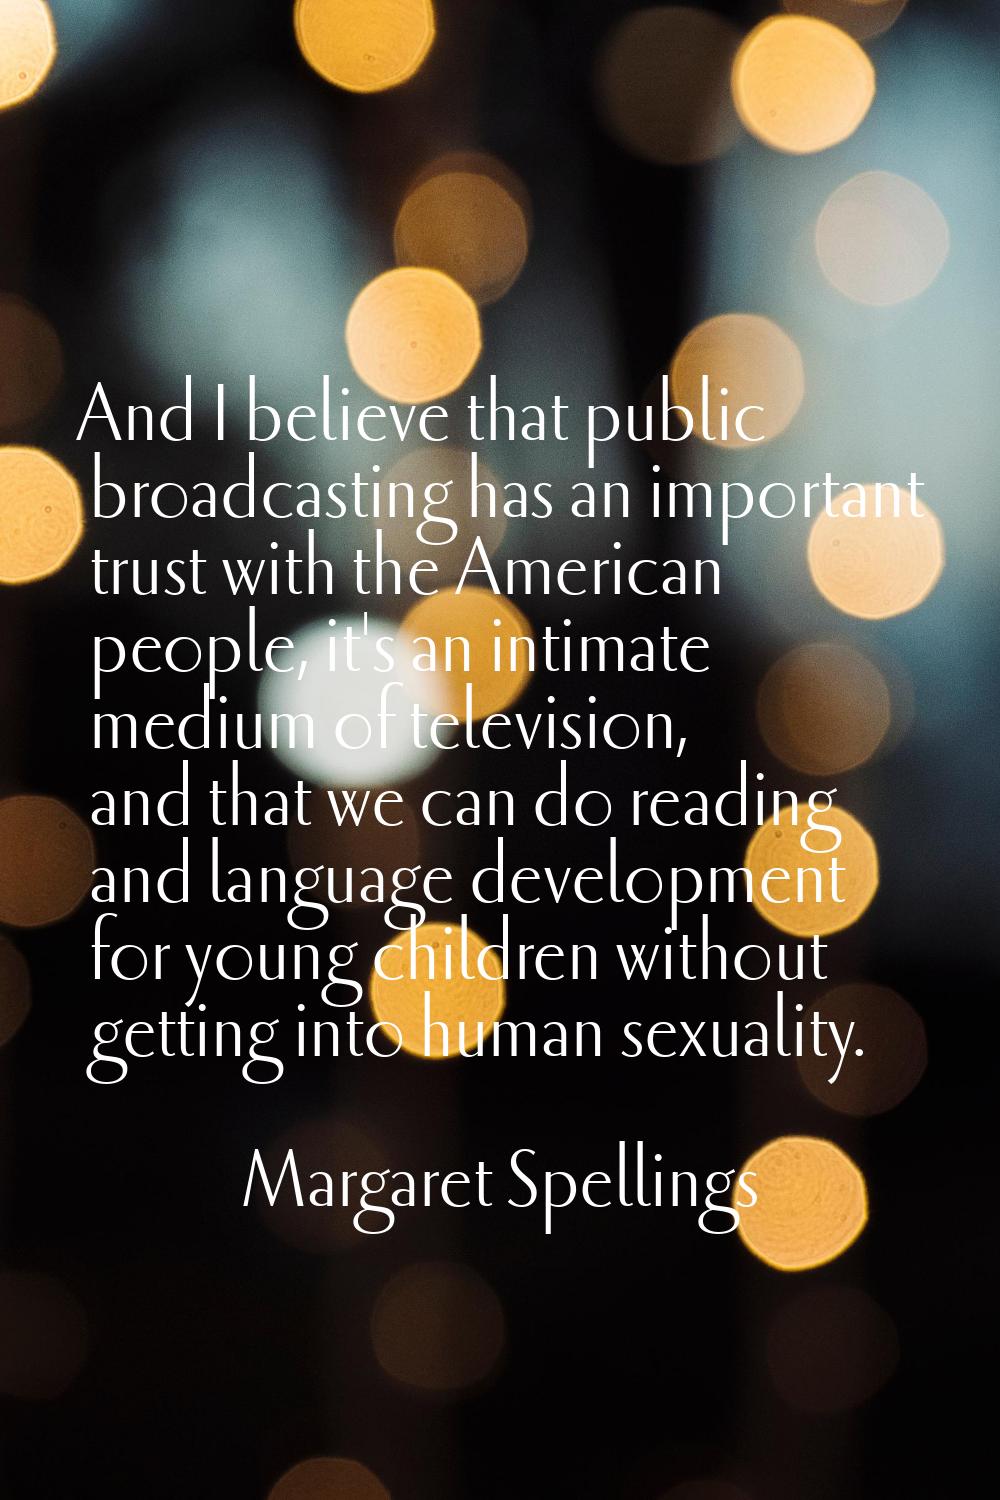 And I believe that public broadcasting has an important trust with the American people, it's an int